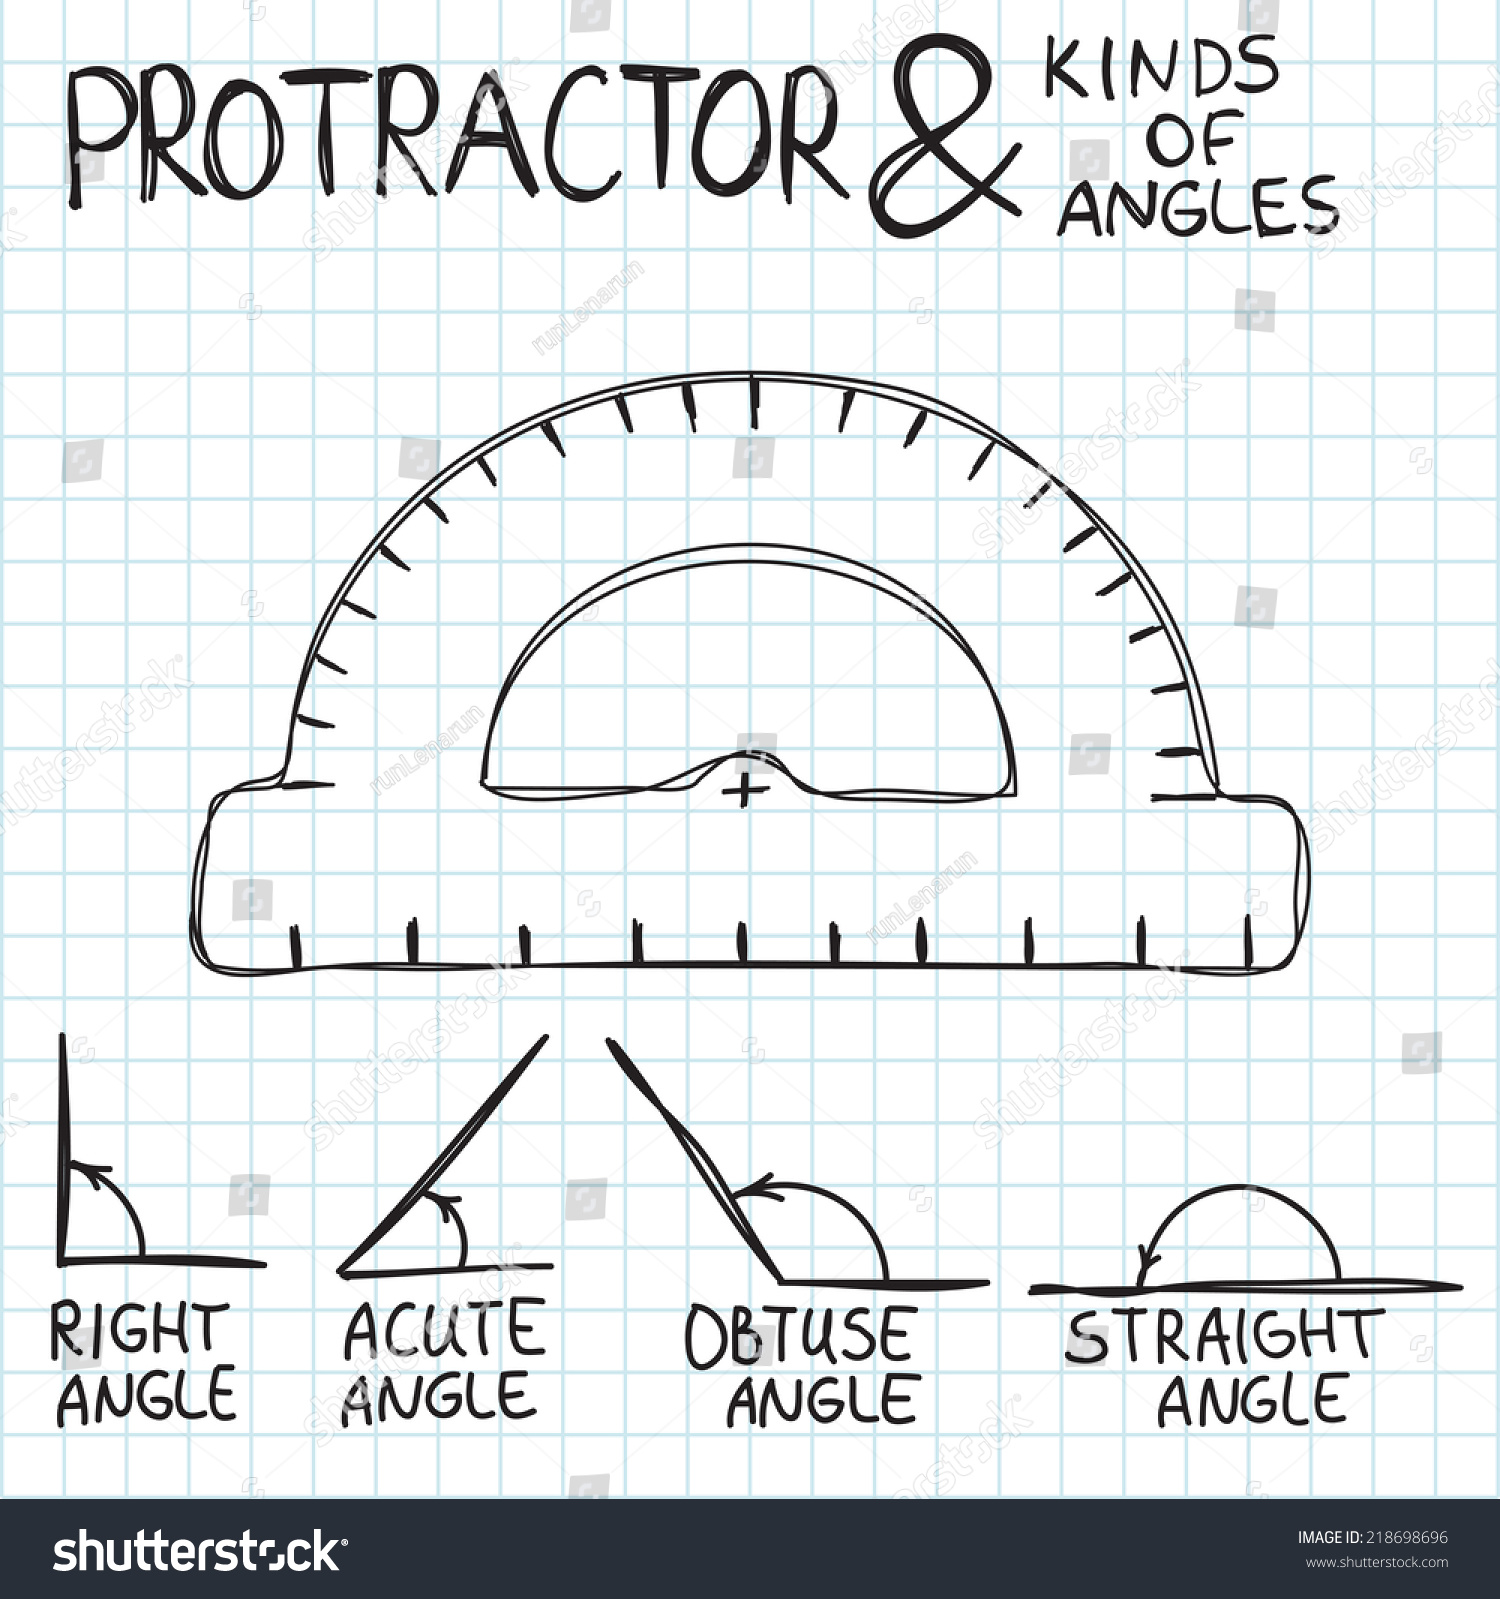 SVG of Hand-drawn protractor and angles. Kinds of angles: right, acute, obtuse, straight. Education, geometry, math. svg